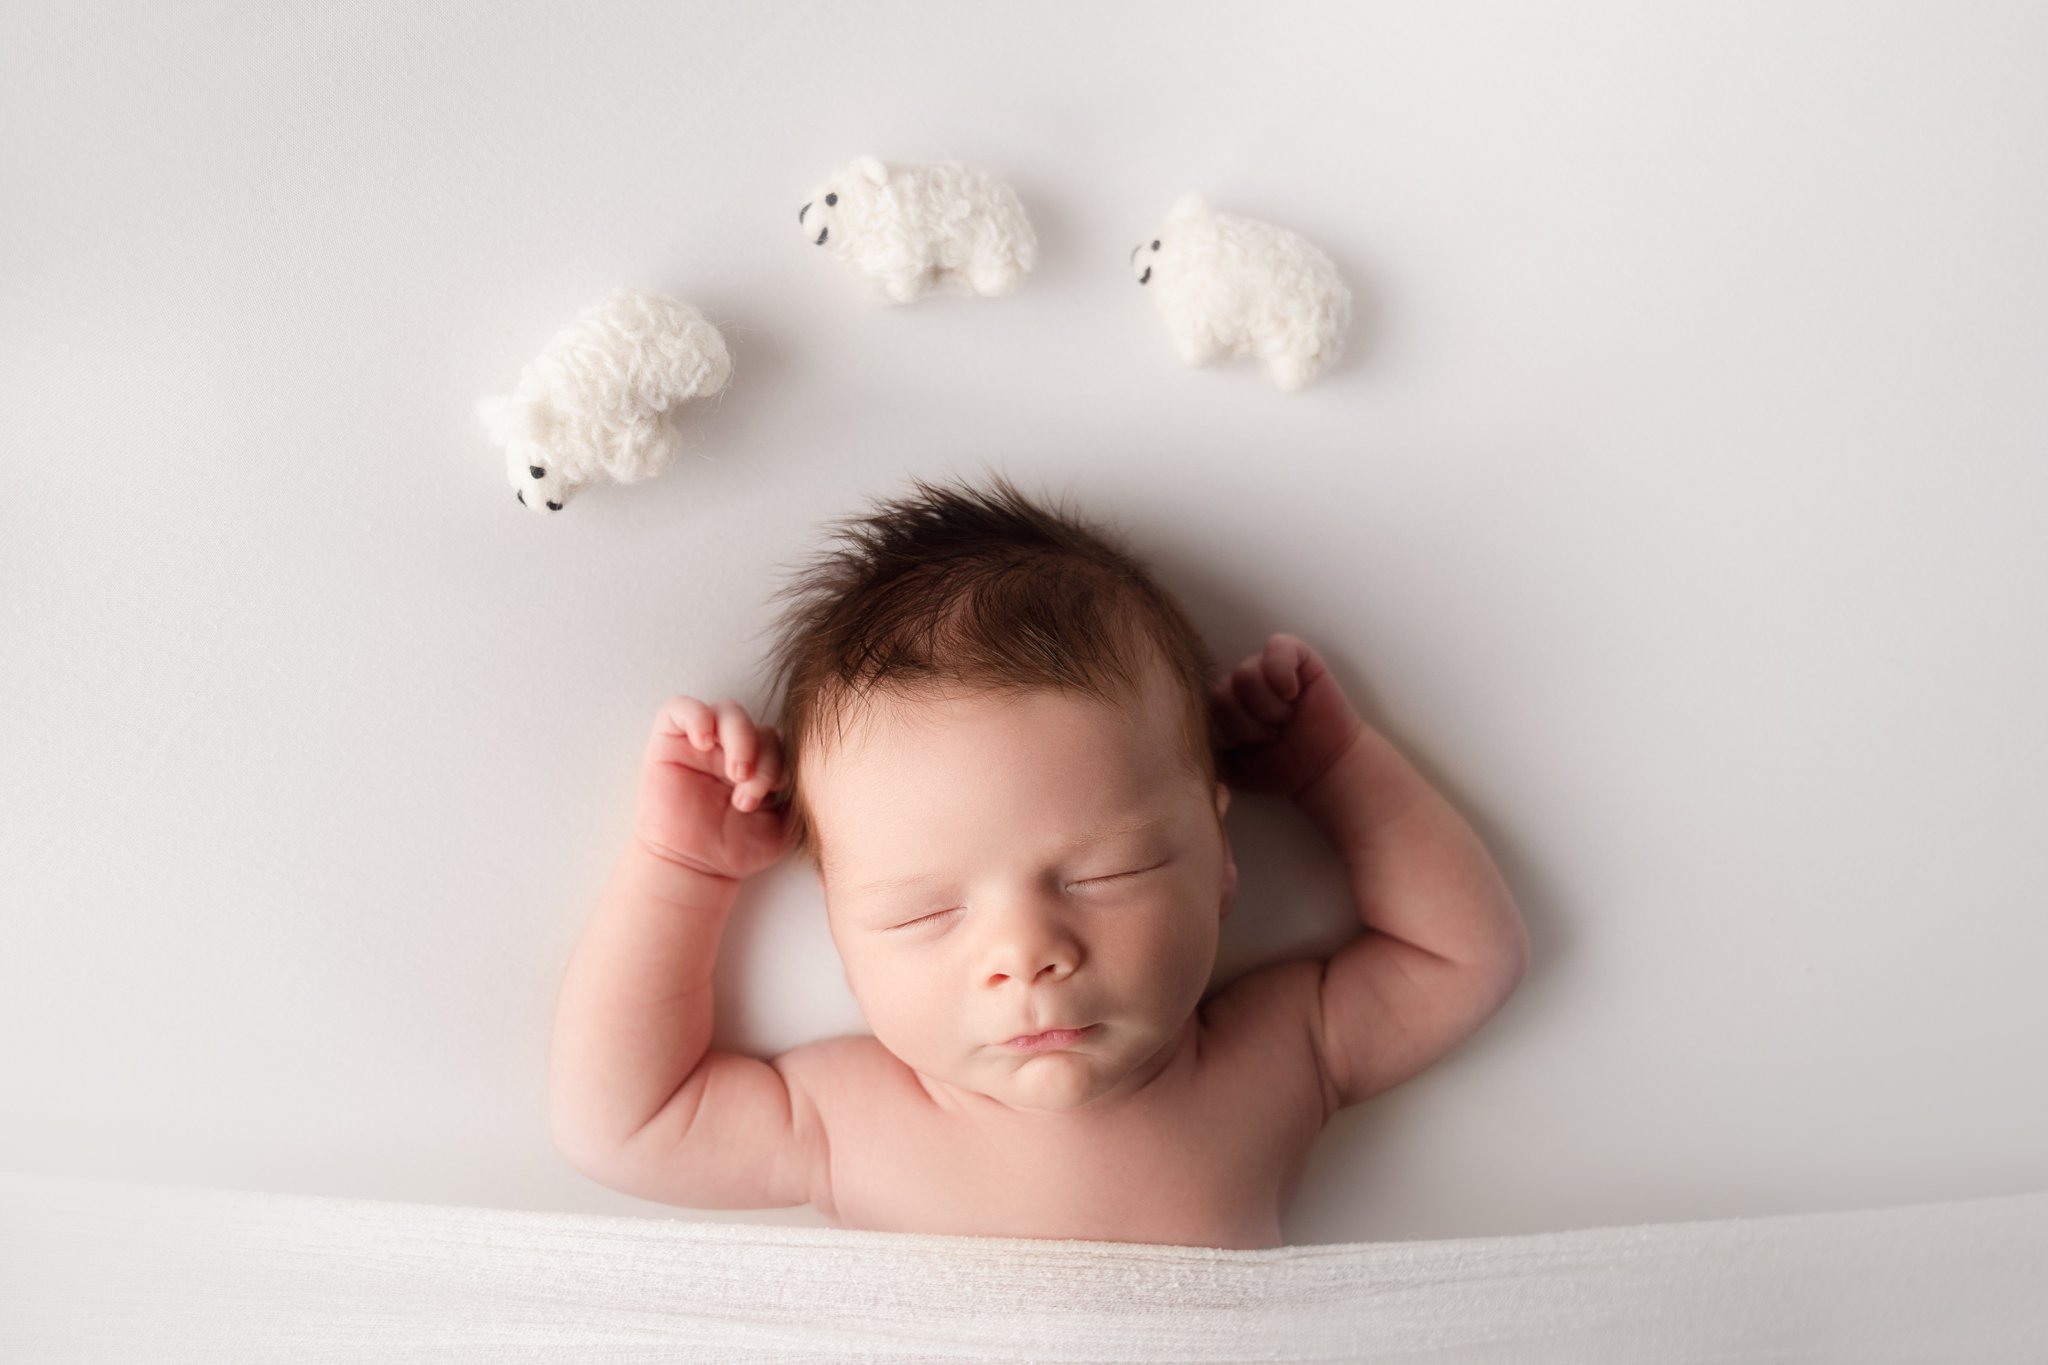 Newborn baby boy being photographed in Jupiter Florida photography studio with three prop sheep jumping over his head while he sleeps on cream backdrop